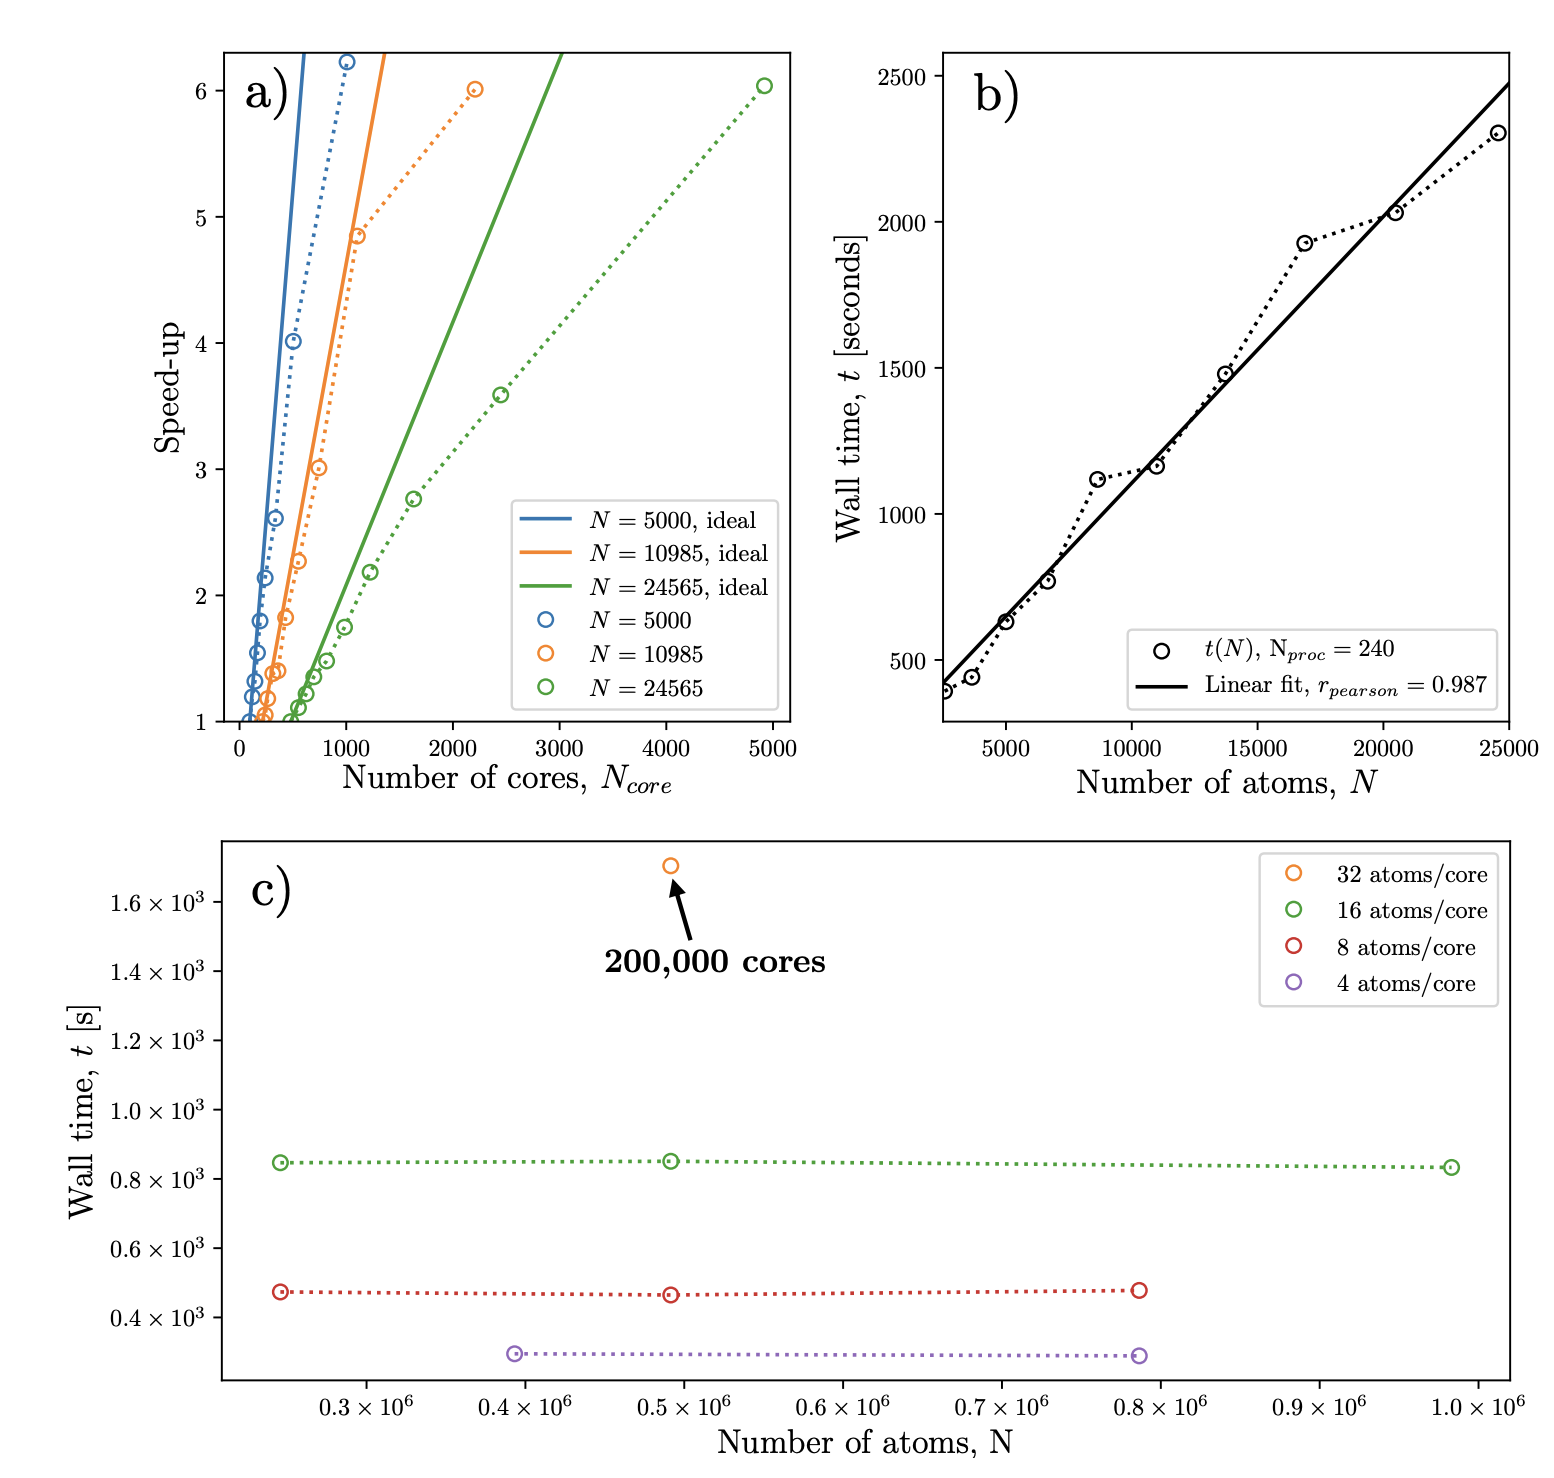 The performance of the density functional theory code CONQUEST on large supercomputers